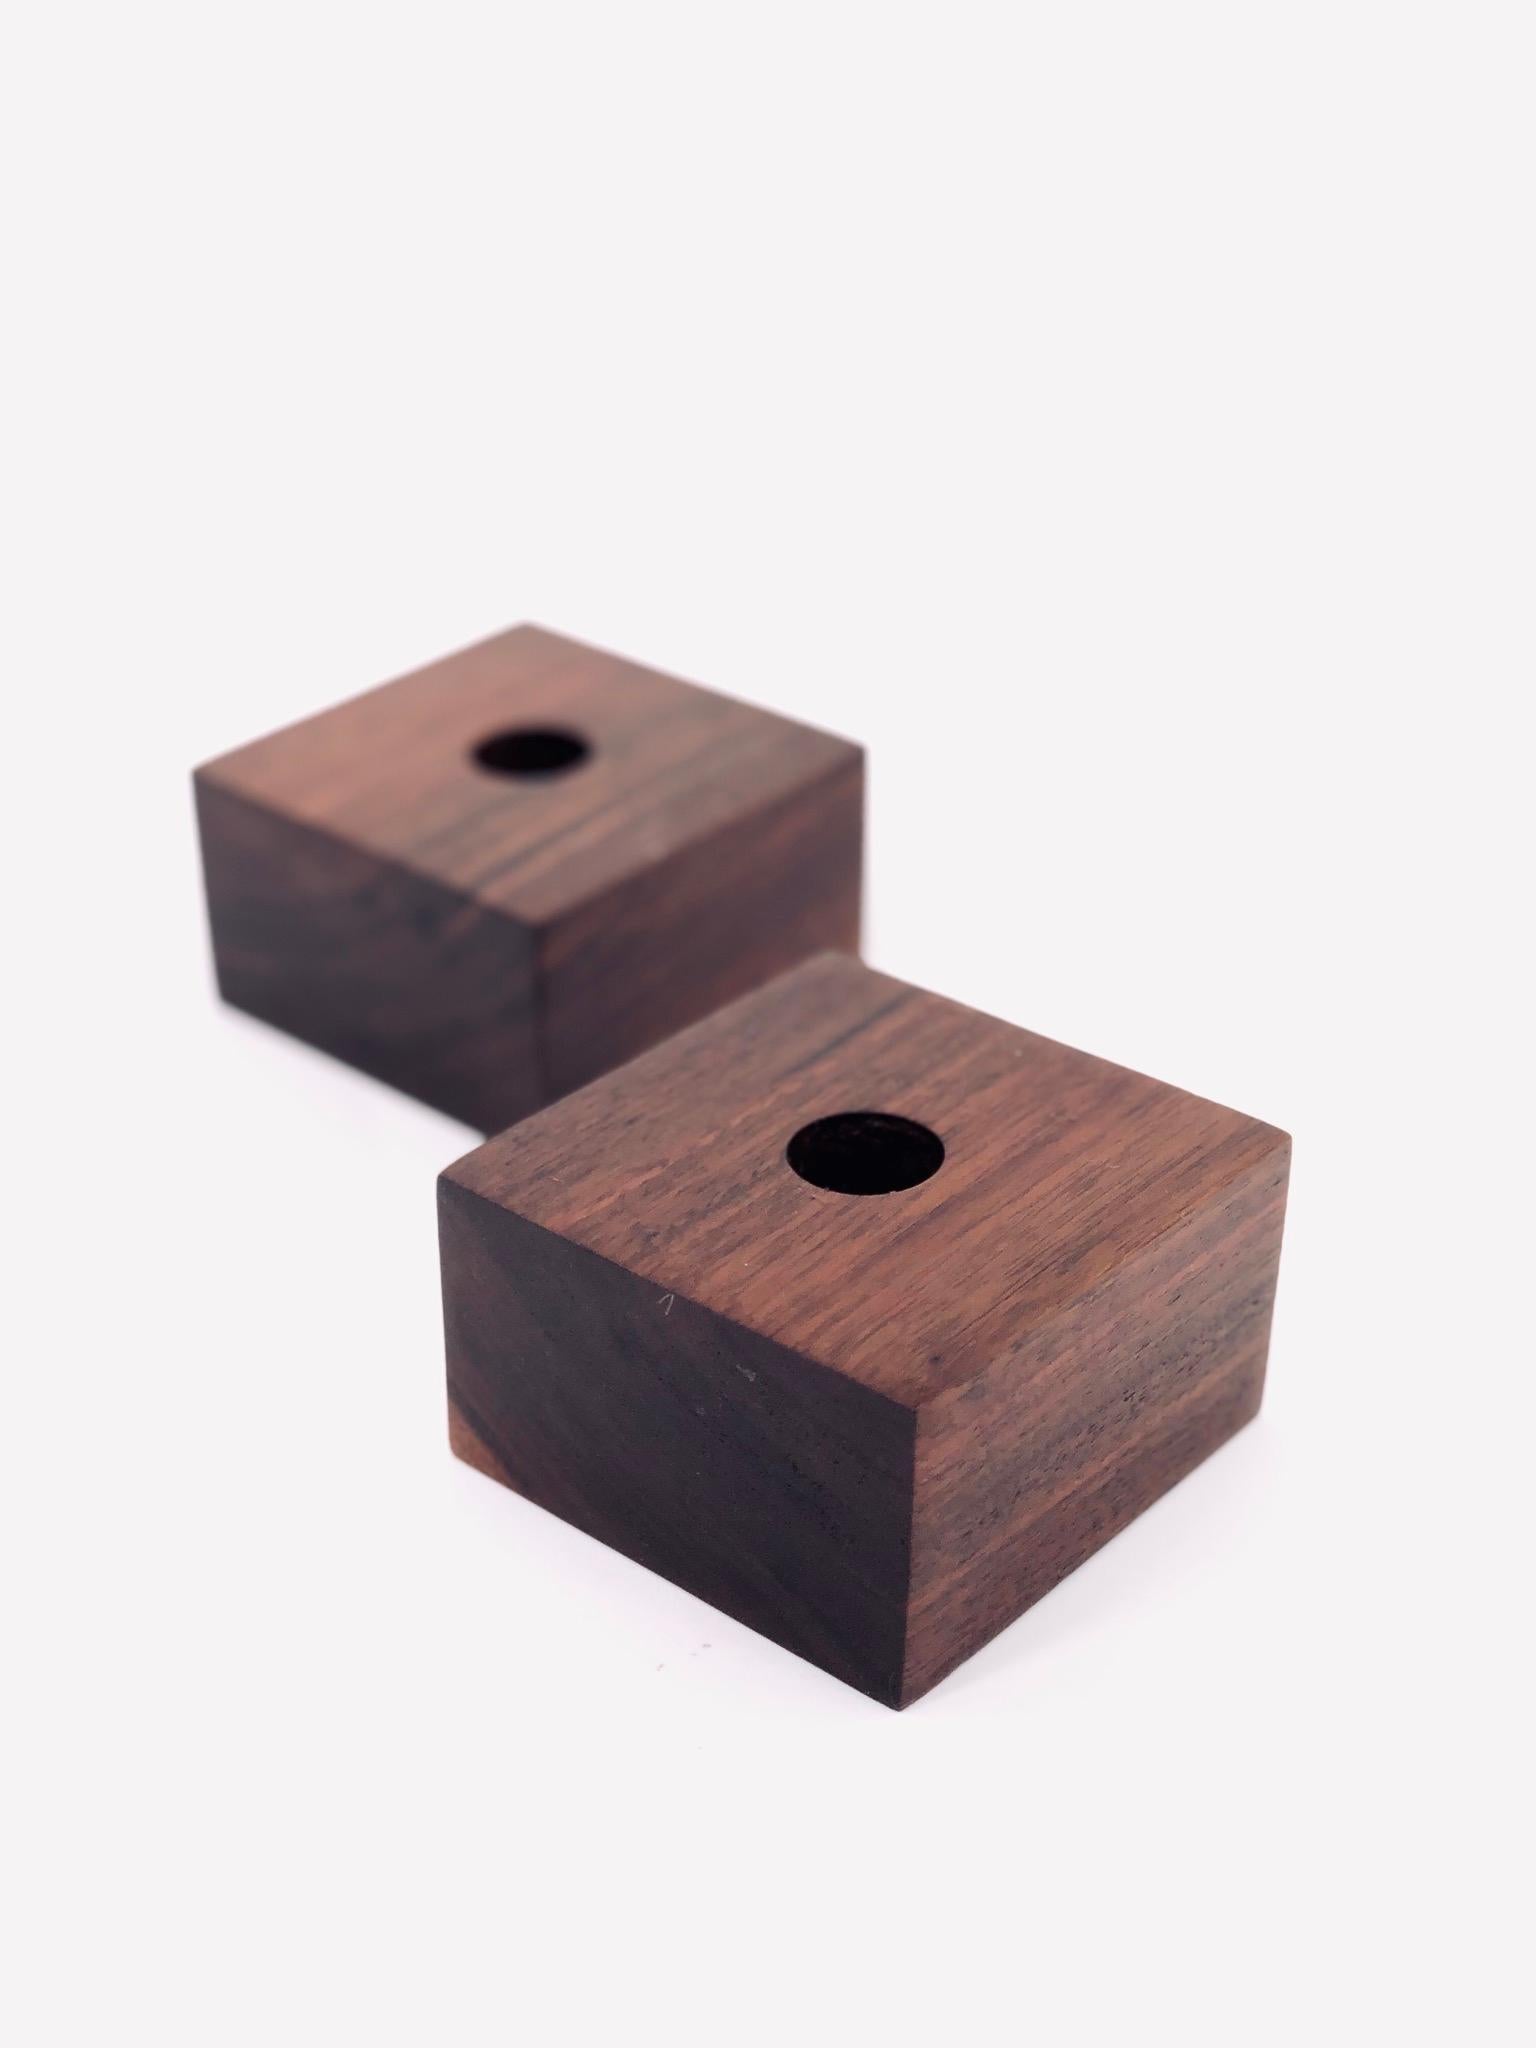 Nice solid walnut square candleholders, circa 1970s. Simple elegant design it fits a 3/4